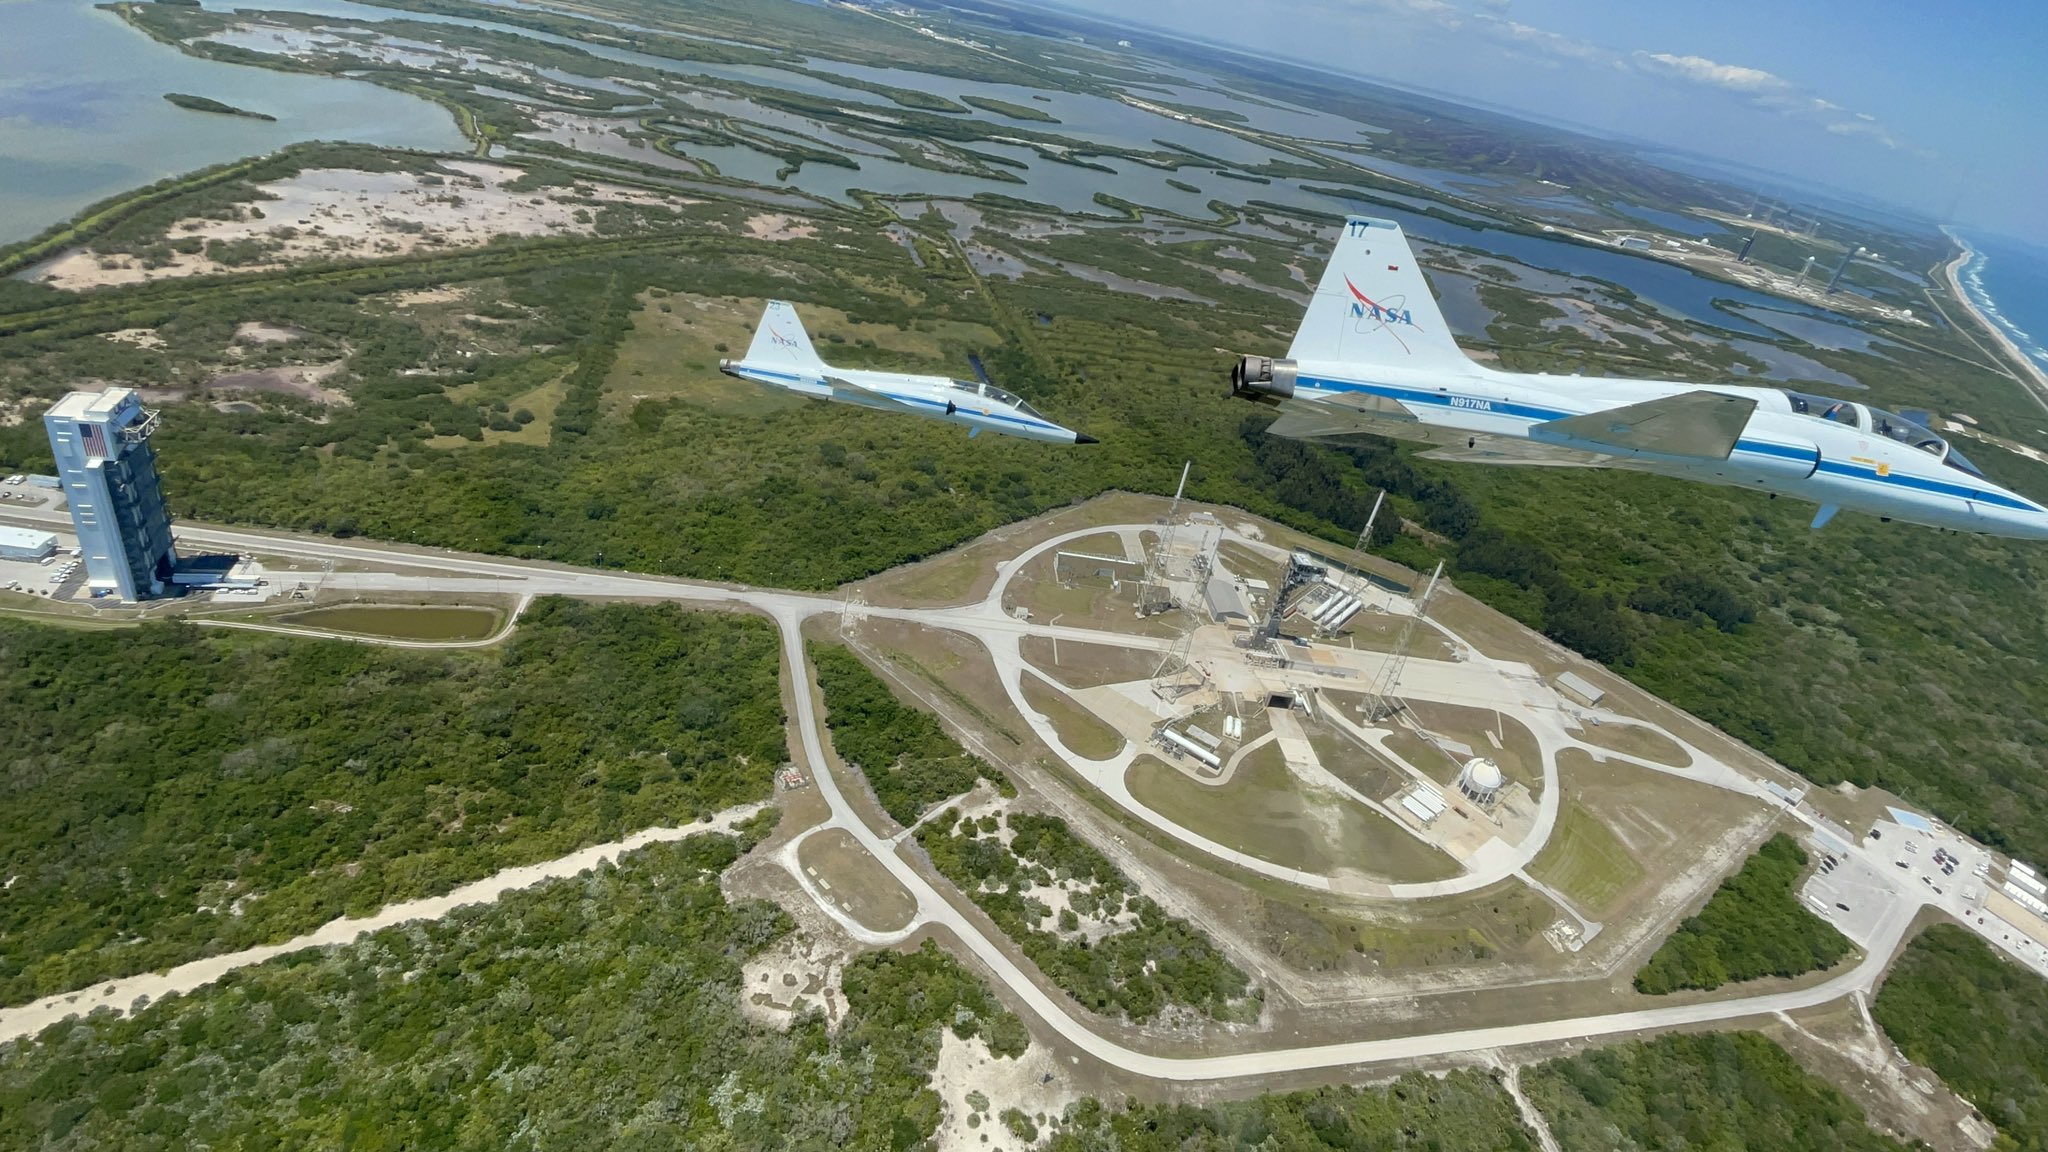 two jets over a launch pad. swamp is in the background. at left is a tall building